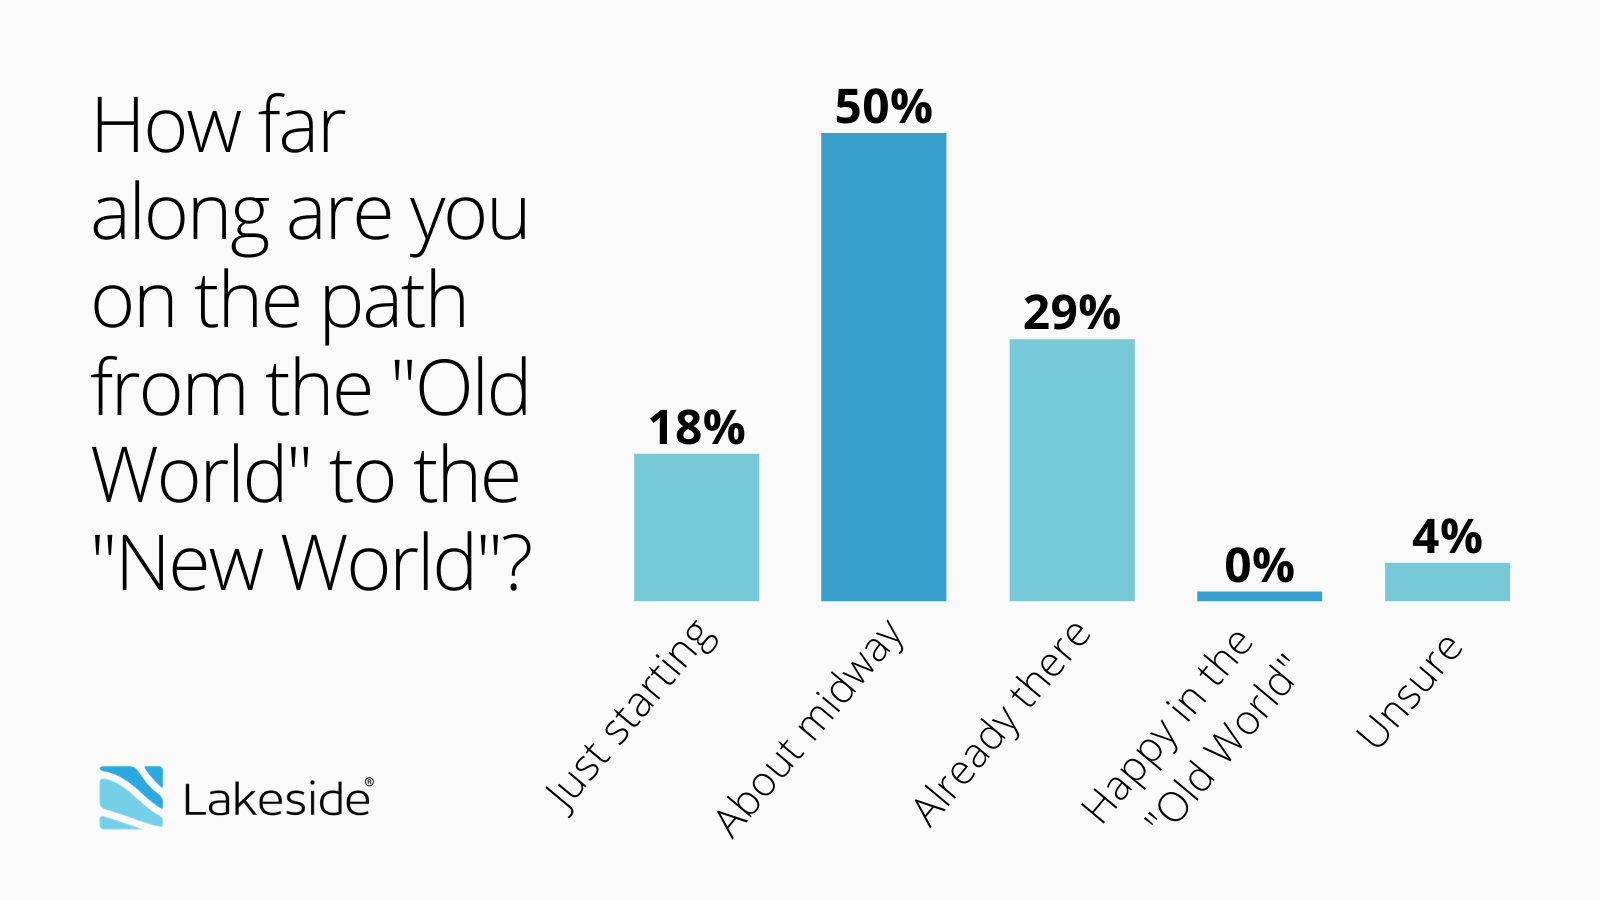 An infographic showing the results of a webinar poll asking "How far along are you on the path from the 'Old World' to the 'New World'?"